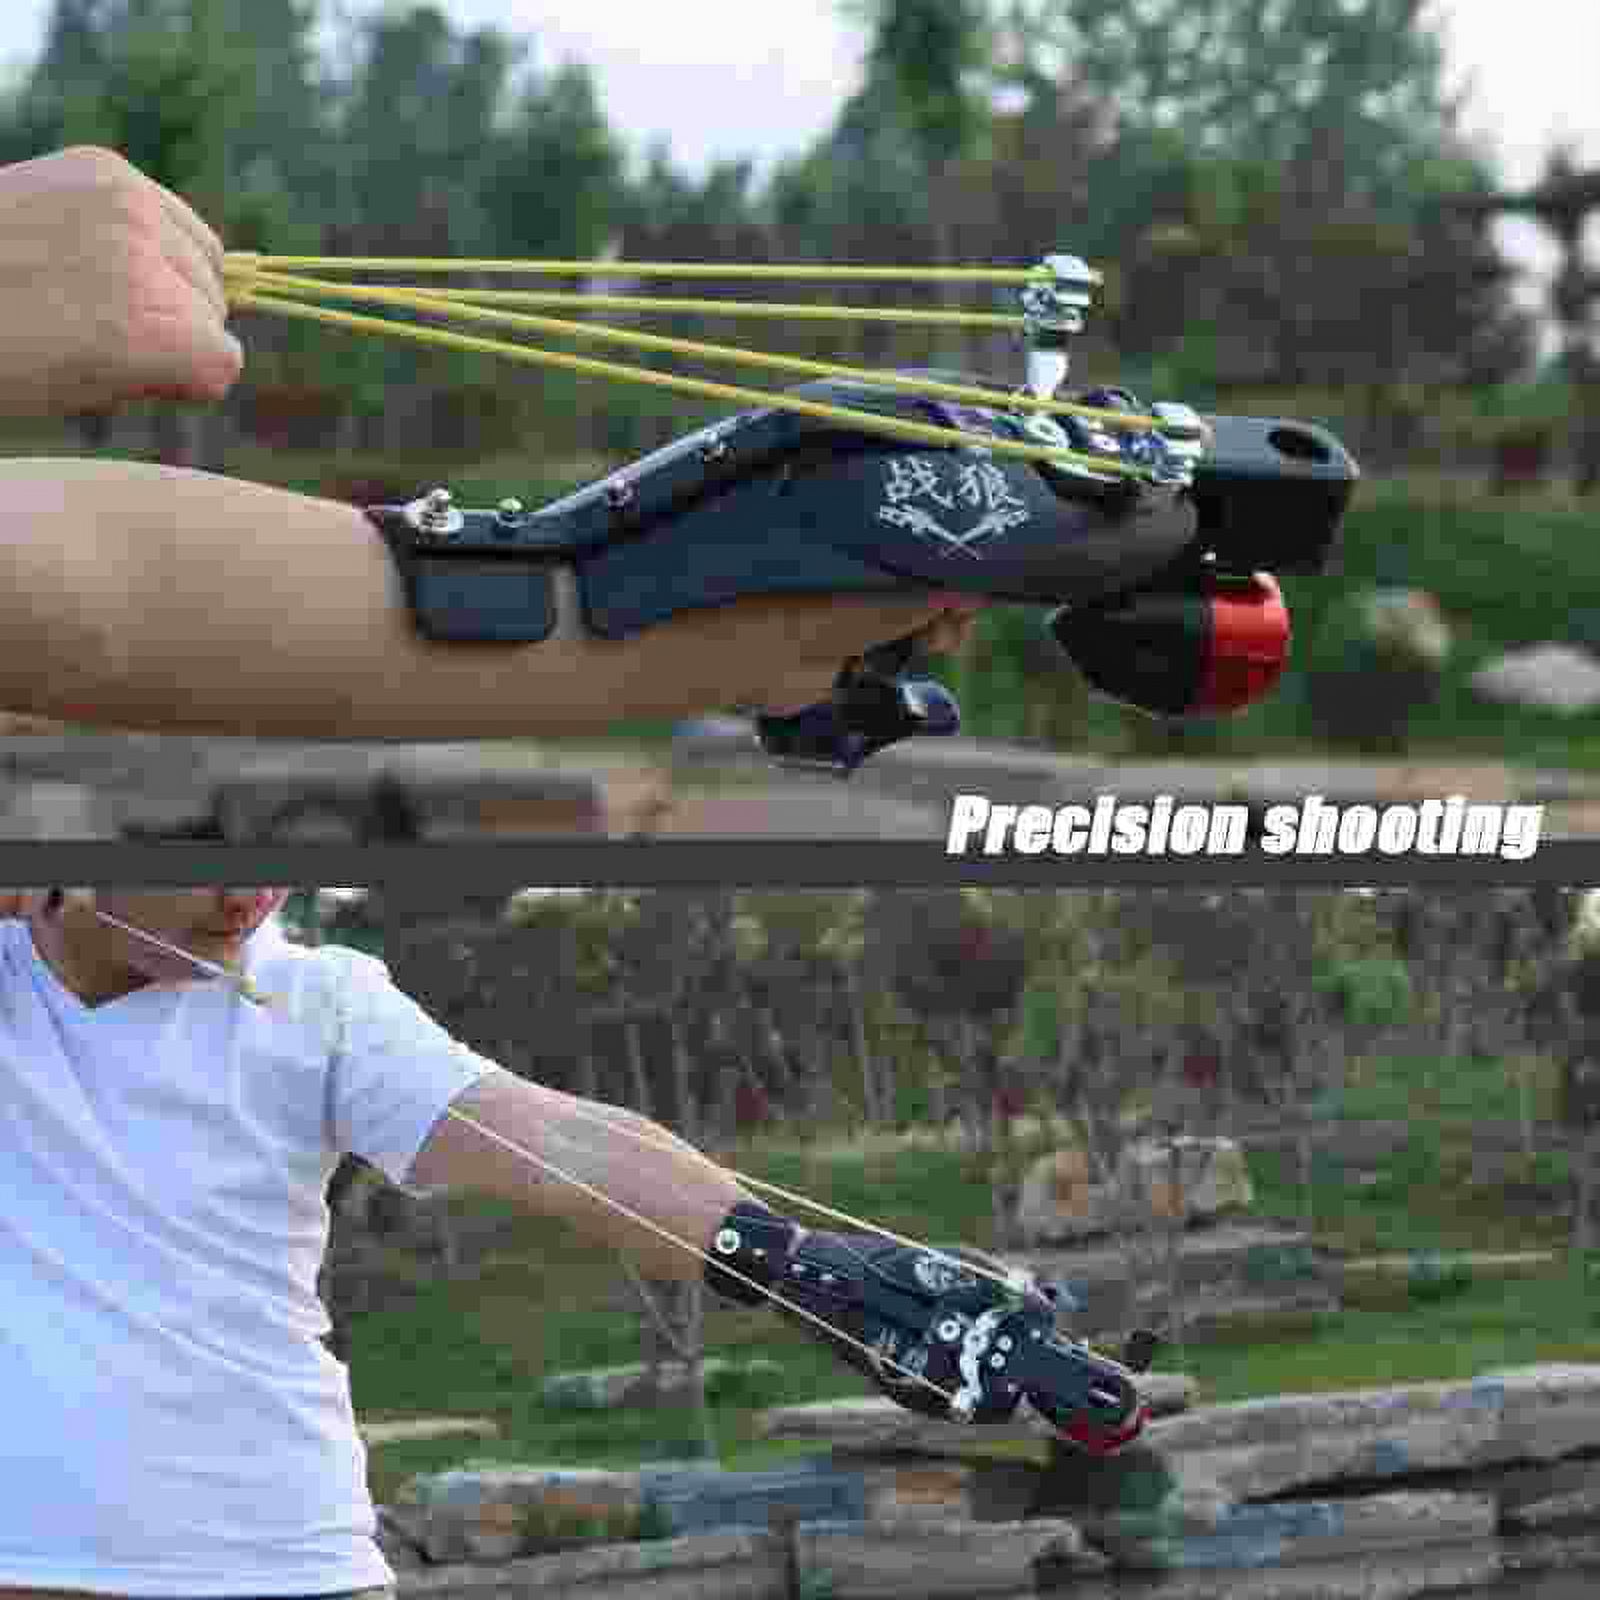 VERY100 High Velocity Hunting Fishing Slingbow Slingshot Fishing Reel  Catapult Arrow Rest and Wrist